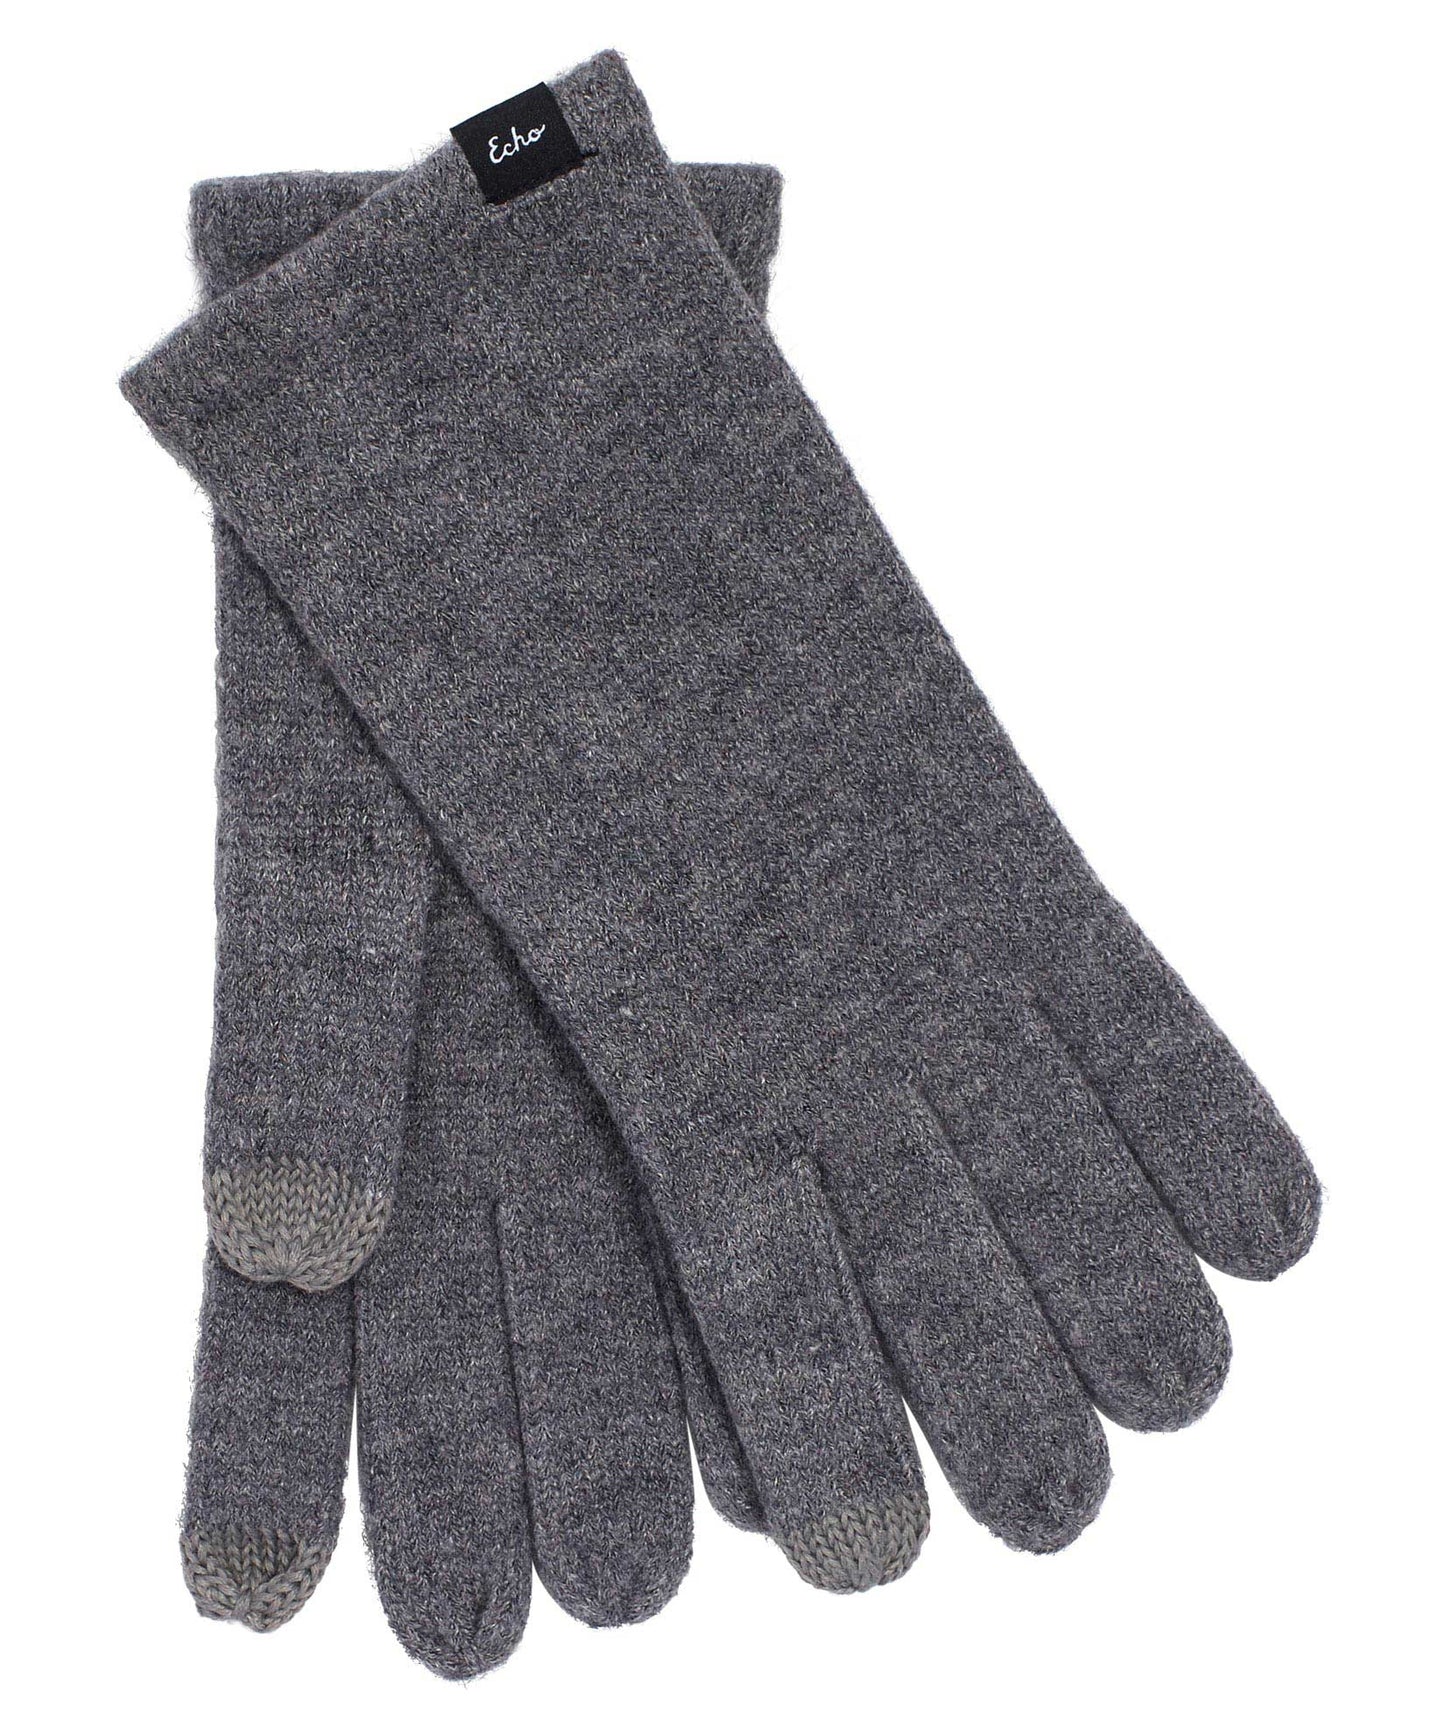 Echo Knit Touch Glove in color Heather Grey